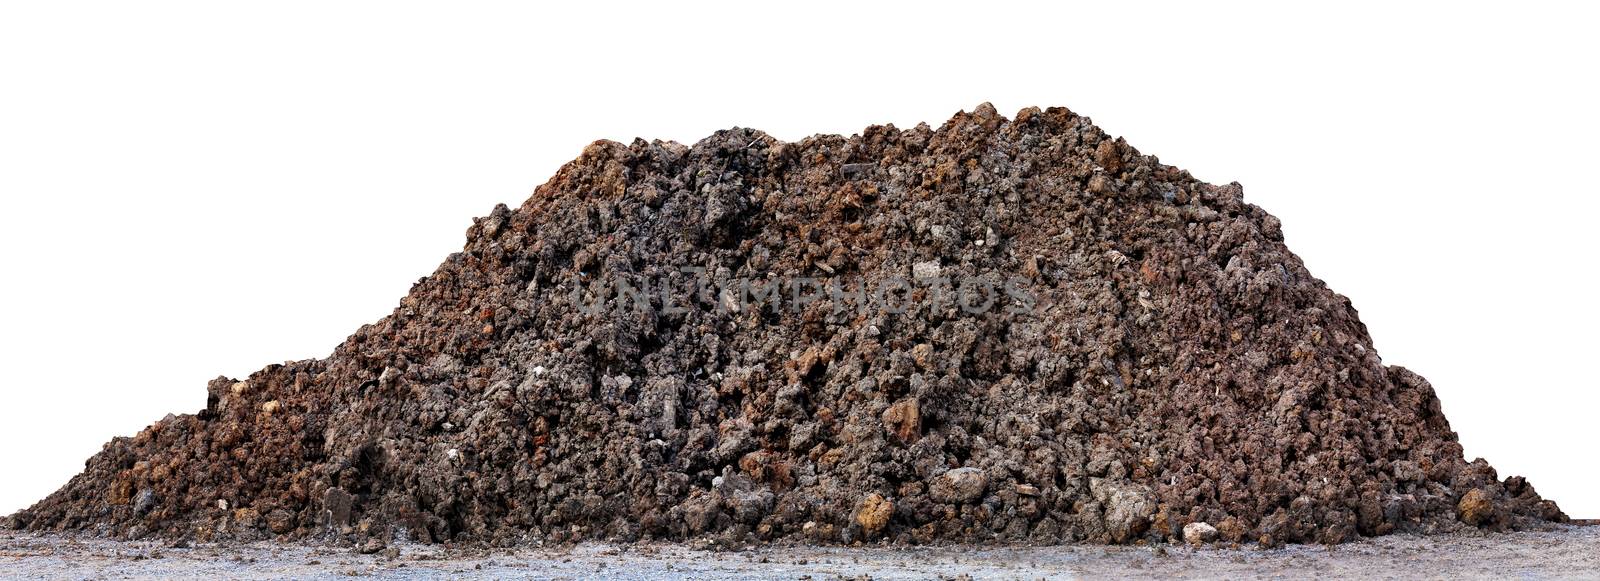 pile dirt isolated on white, dirt hill for construction space, heap black dirt for planting, dirt clay mountain big, mound soil